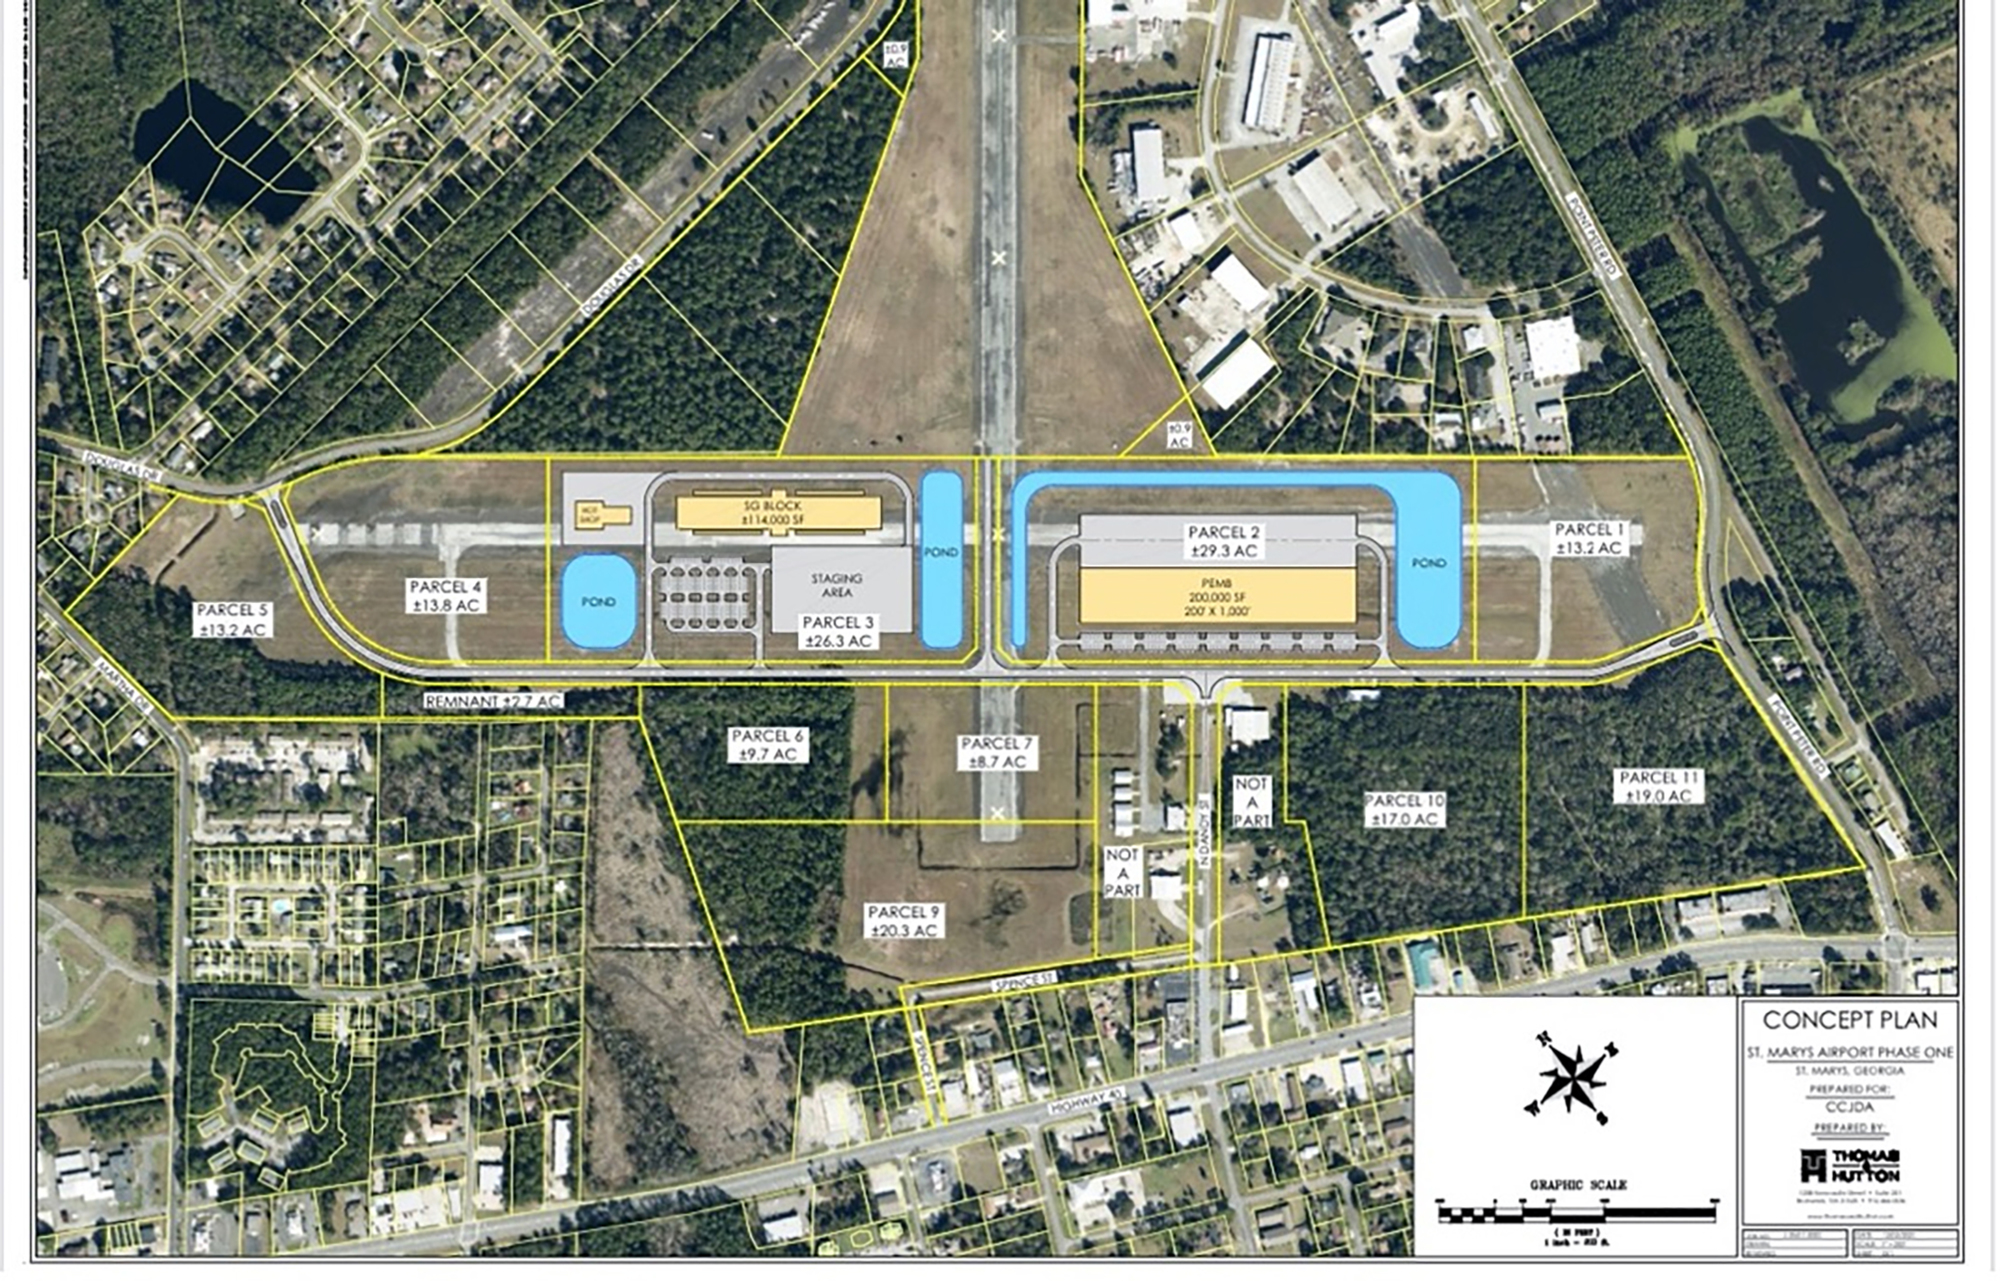 A preliminary site plan for the future SG Blocks manufacturing facility in St. Marys, Georgia.